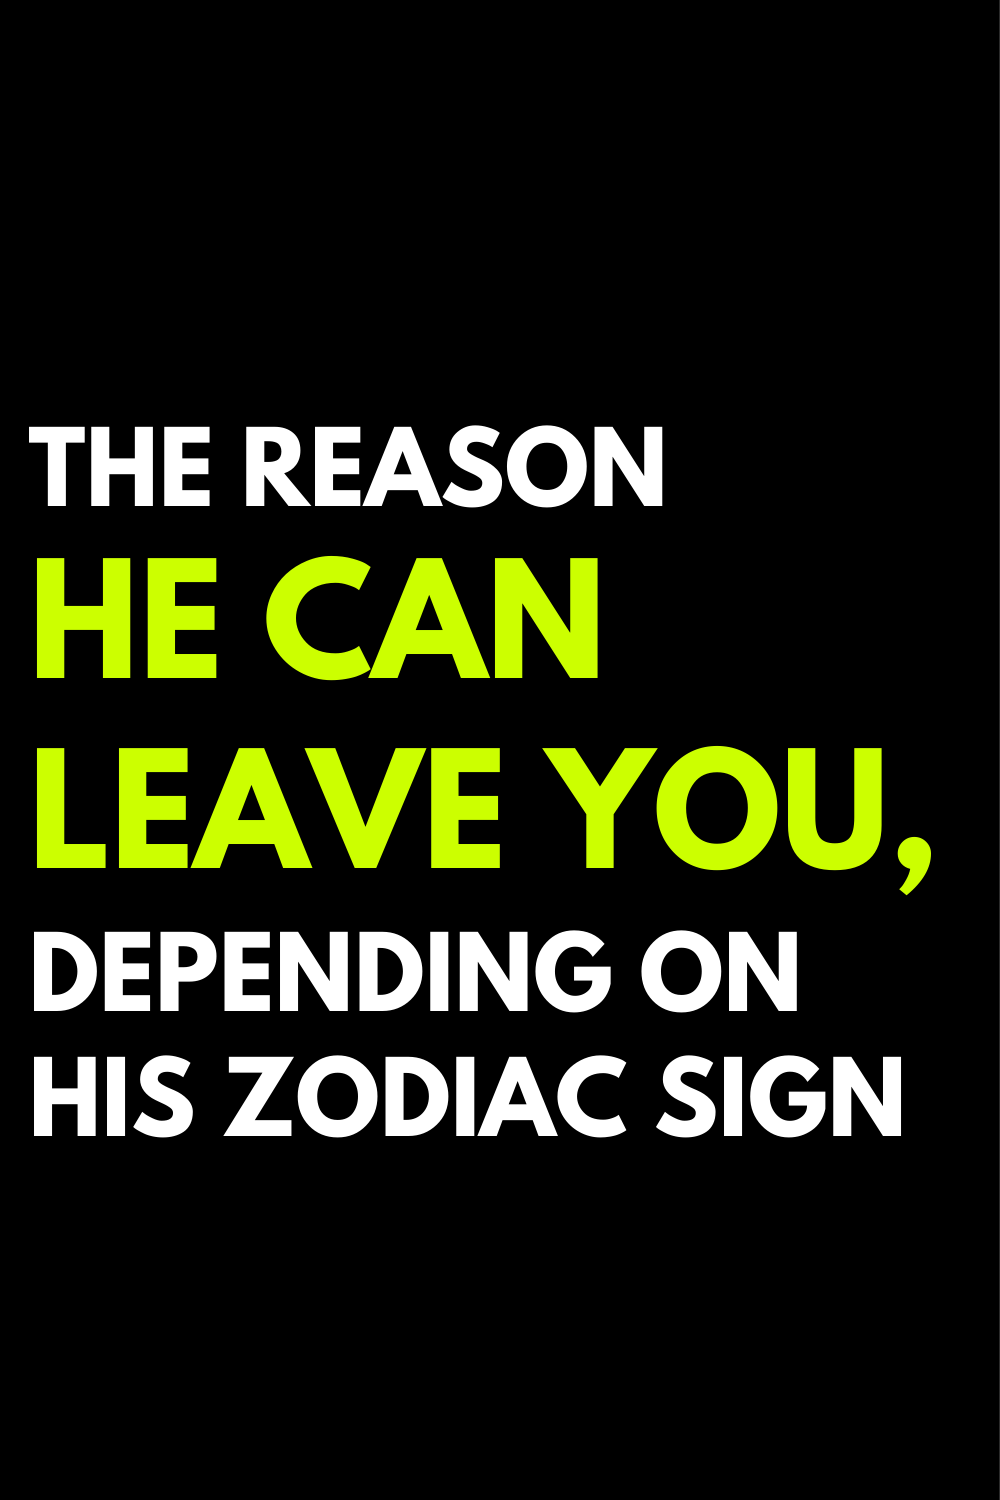 The reason he can leave you, depending on his zodiac sign